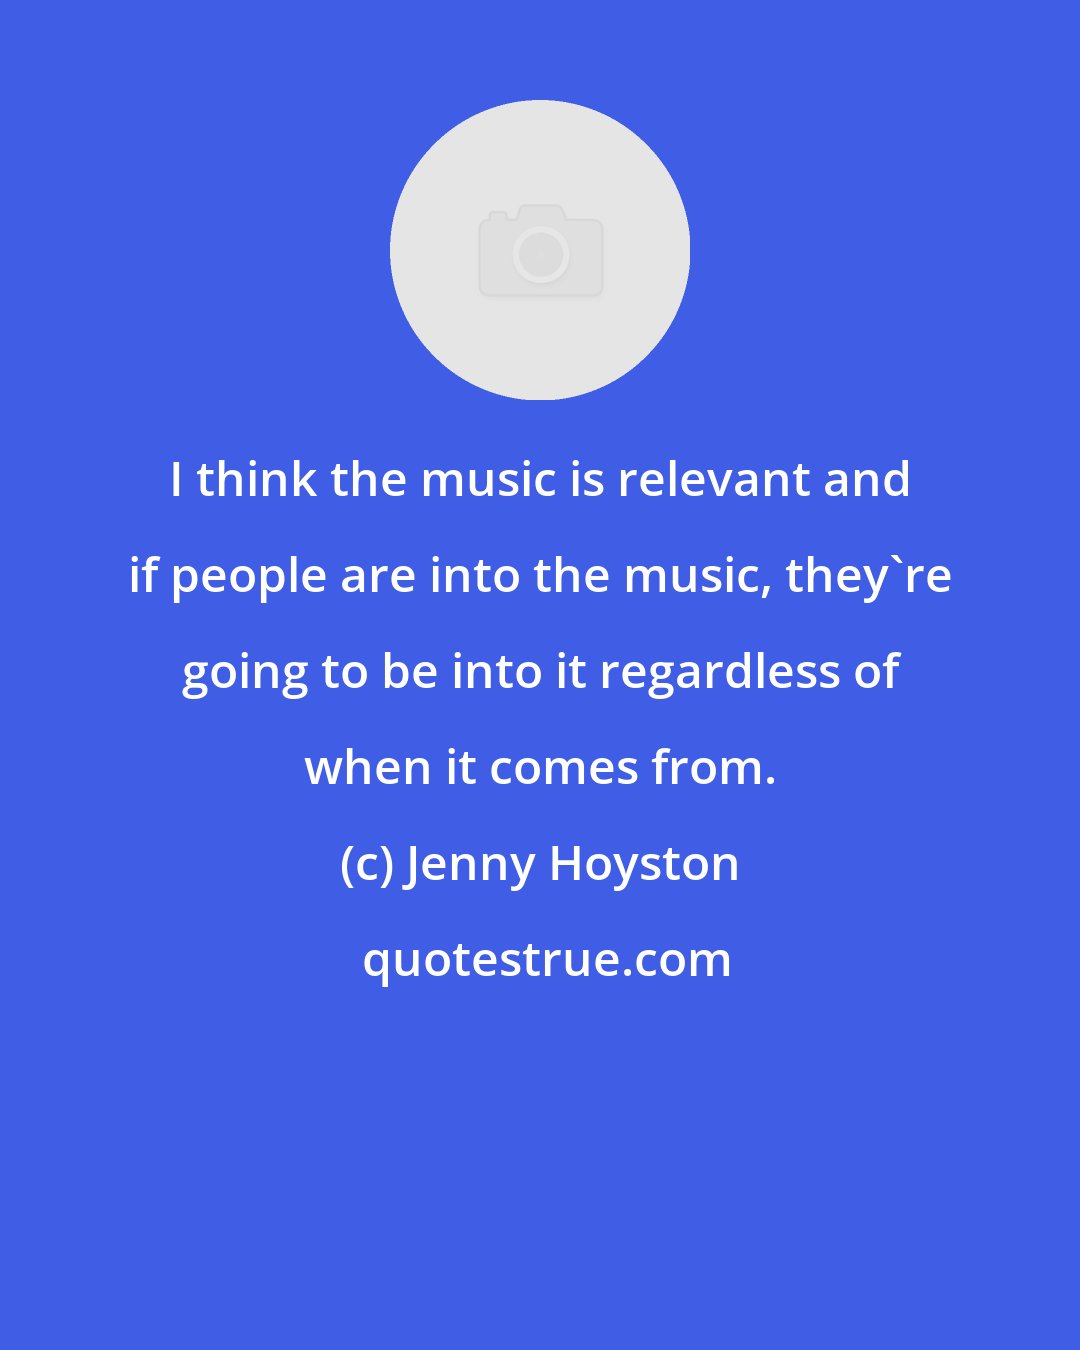 Jenny Hoyston: I think the music is relevant and if people are into the music, they're going to be into it regardless of when it comes from.